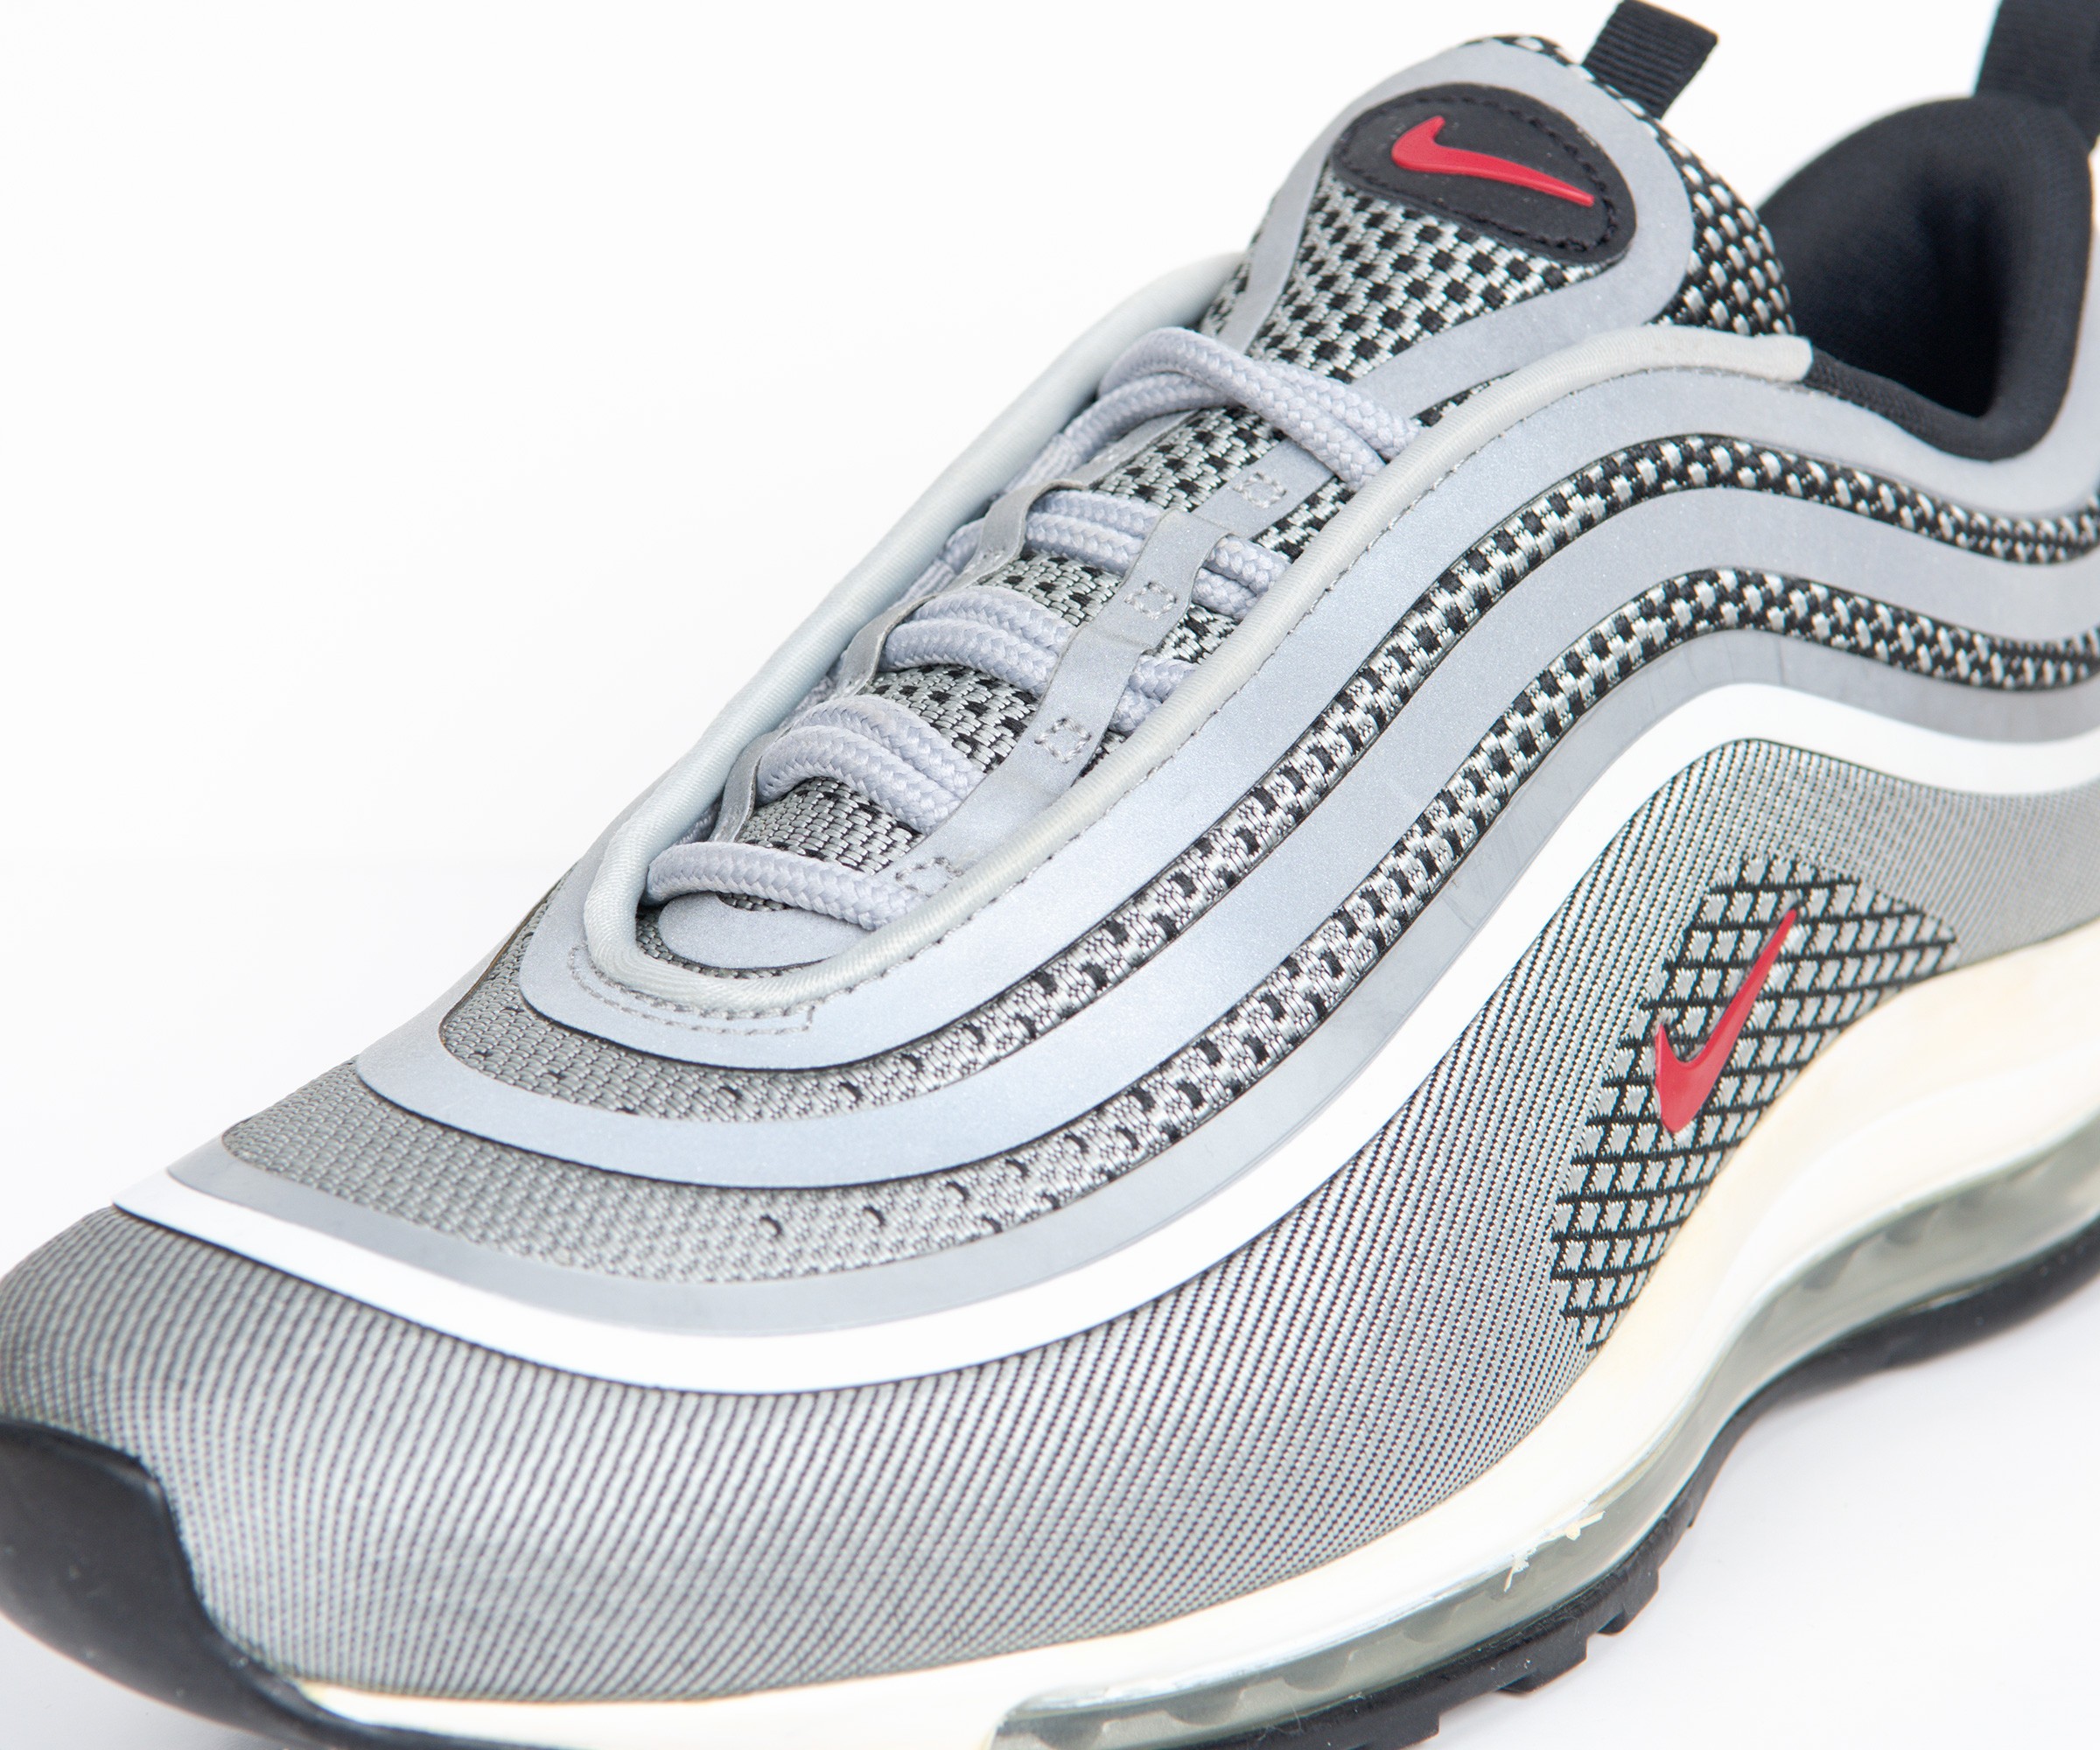 RE-POCKETS NIKE TRAINERS RE-POCKETS Nike Air Max 97 Ultra 17 Silver Bullet